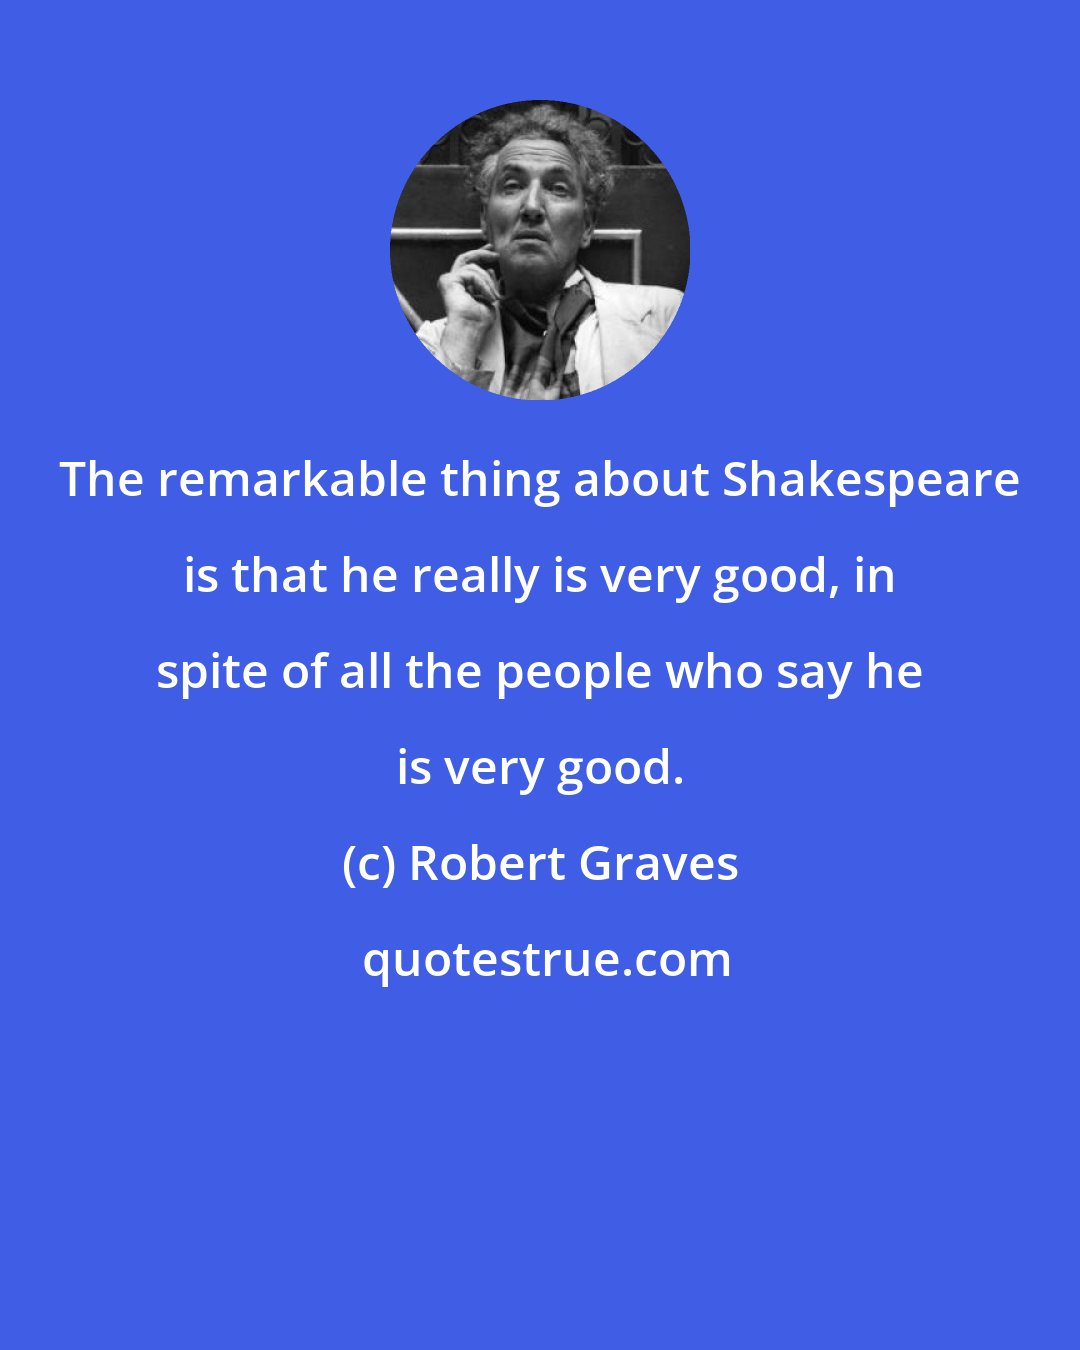 Robert Graves: The remarkable thing about Shakespeare is that he really is very good, in spite of all the people who say he is very good.